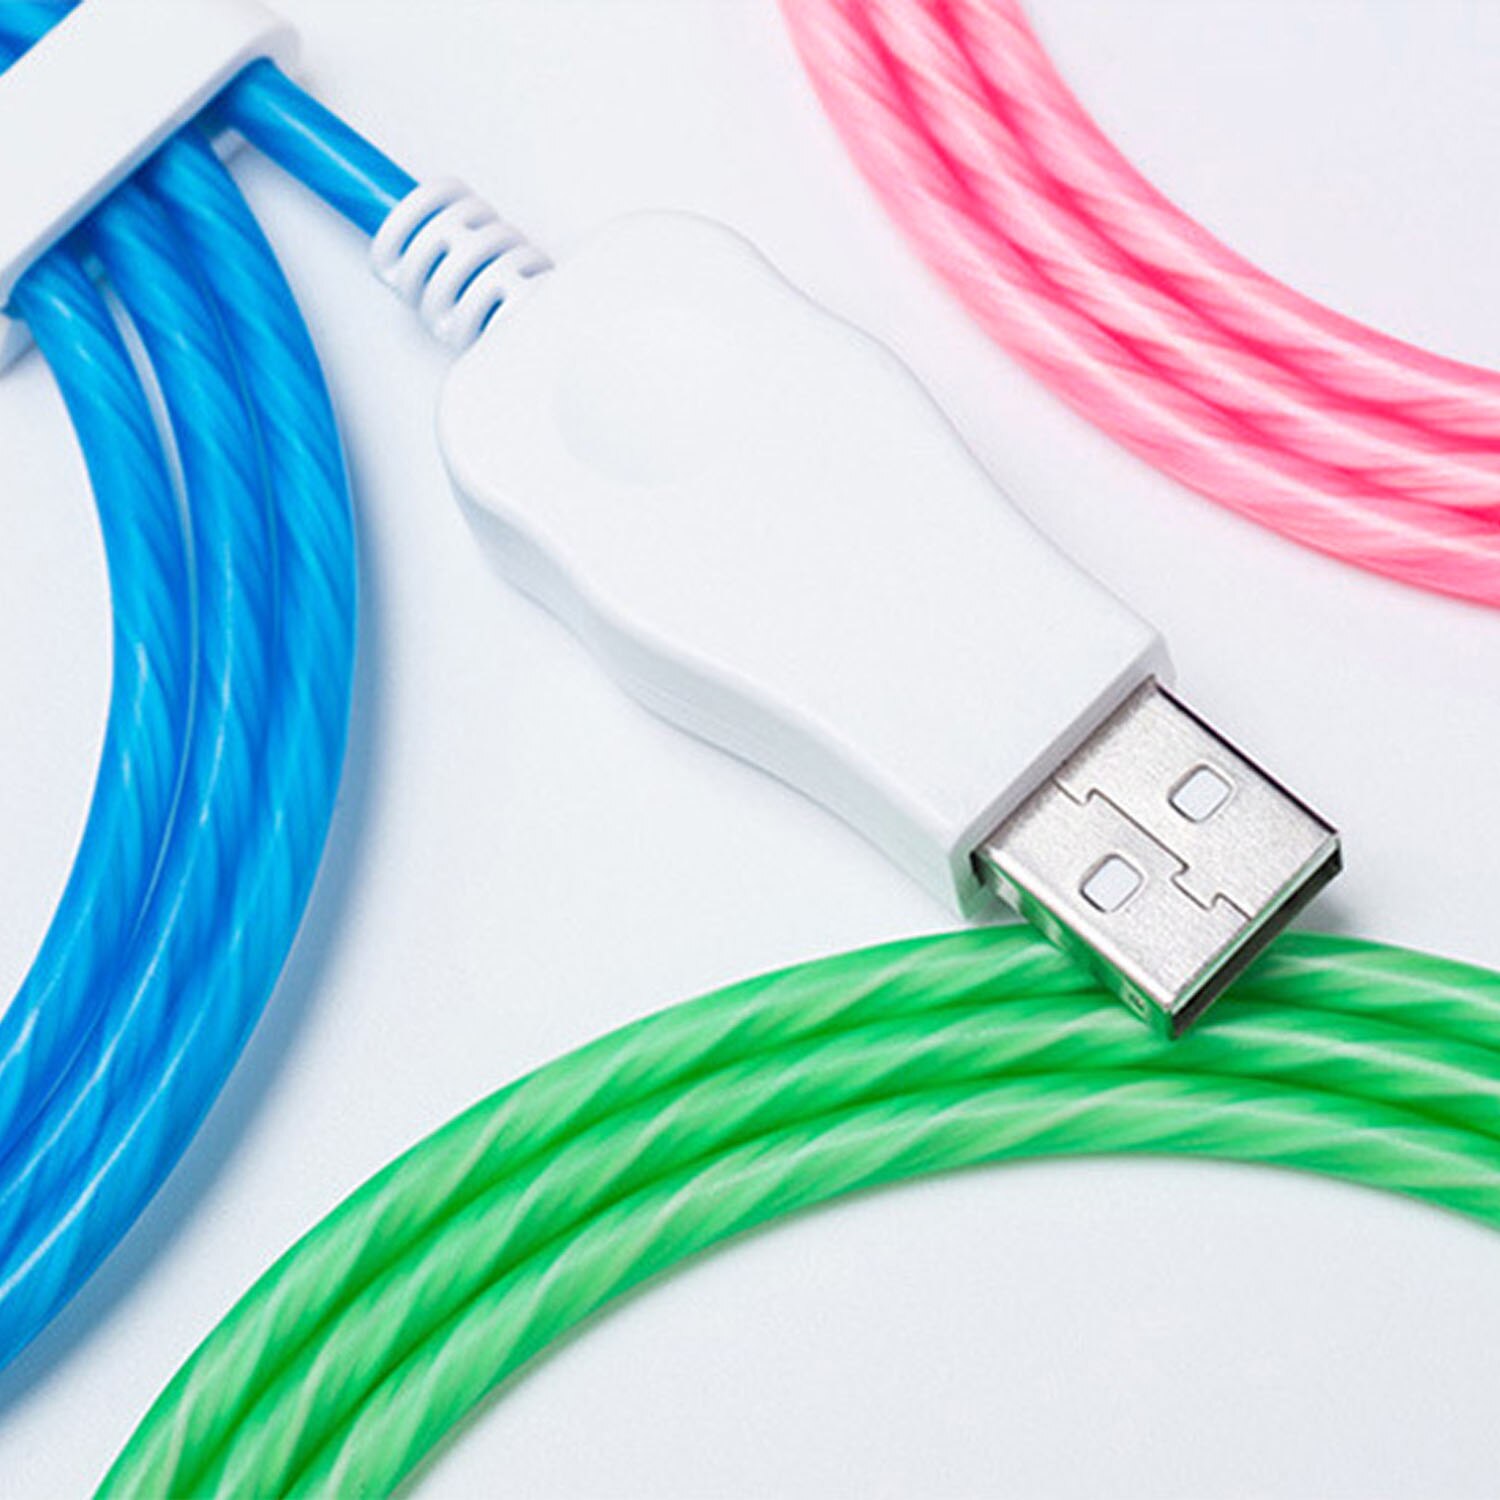 LED Charging Cable Visible Flow USB Charger Cable for HUAWEI Xiaomi Samsung Android Phone Data Cable Green / Red / Green 1m